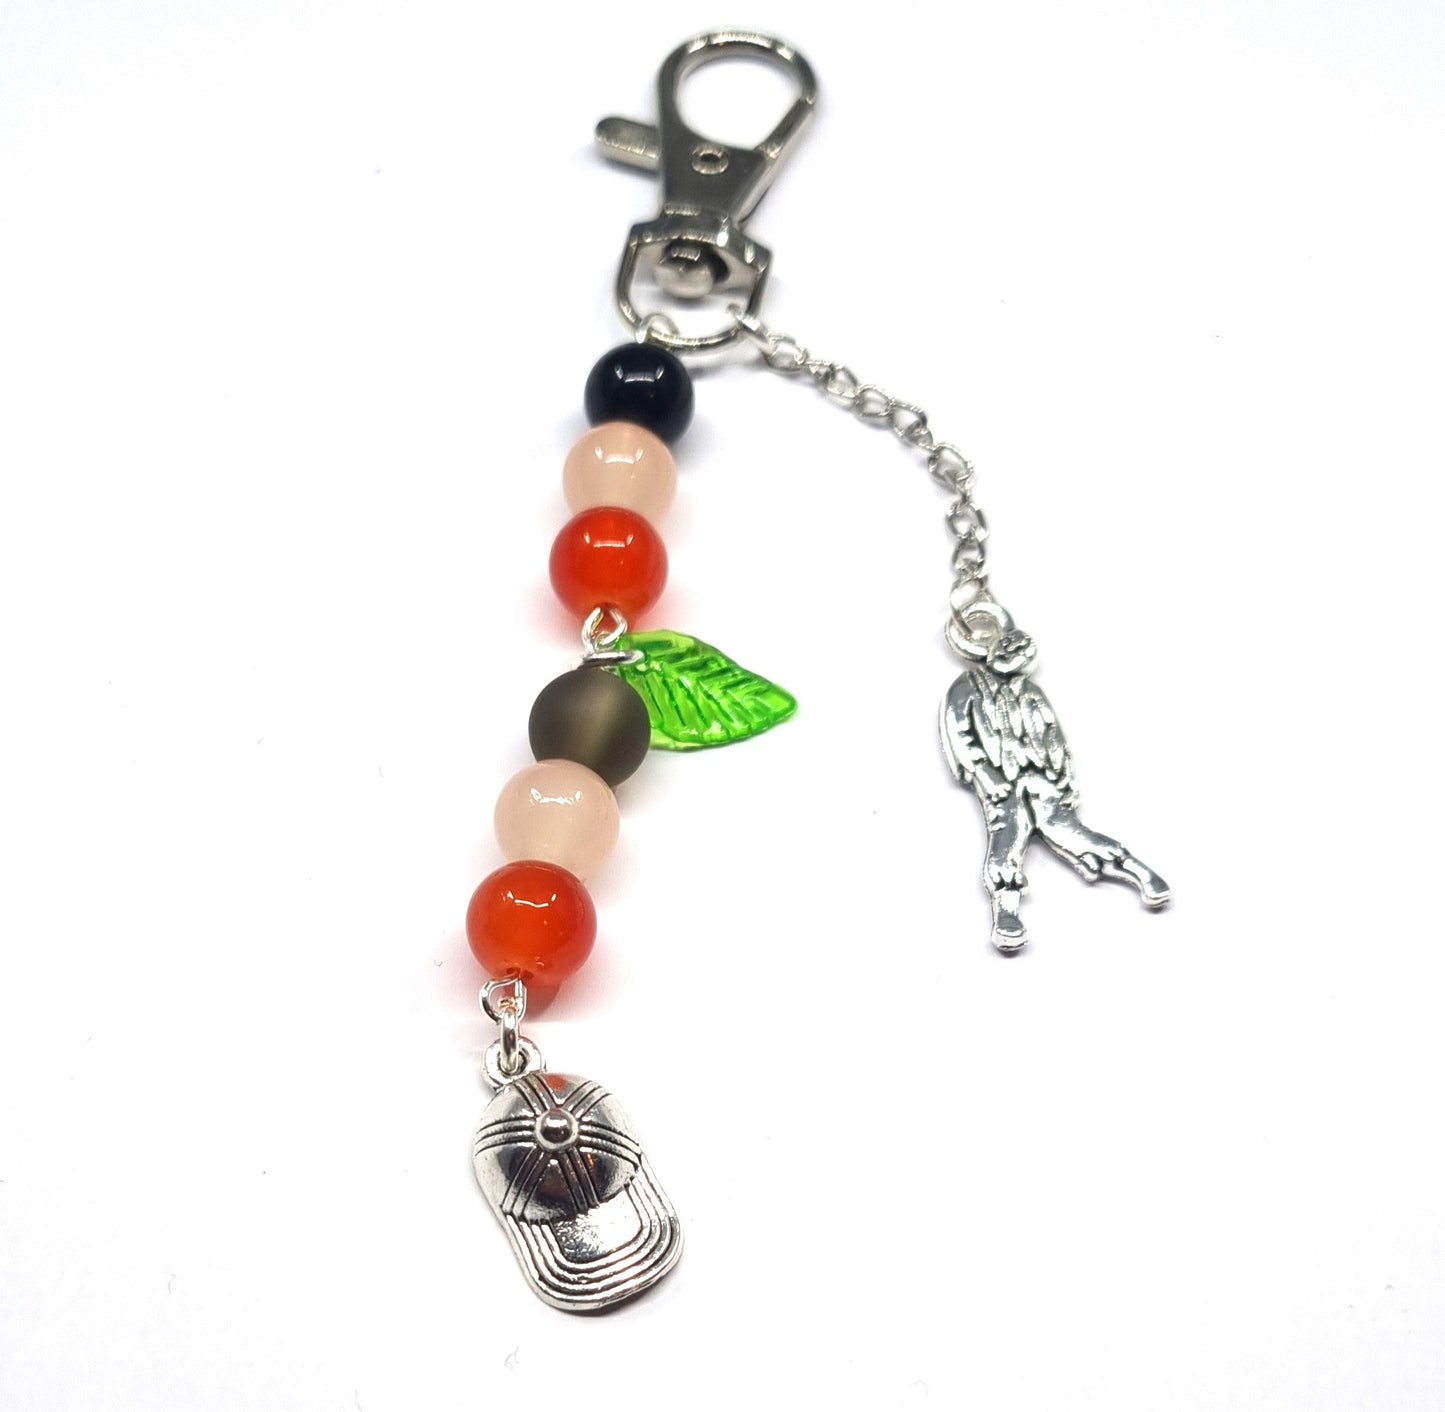 Clementine The Walking Dead Game Inspired Keyring